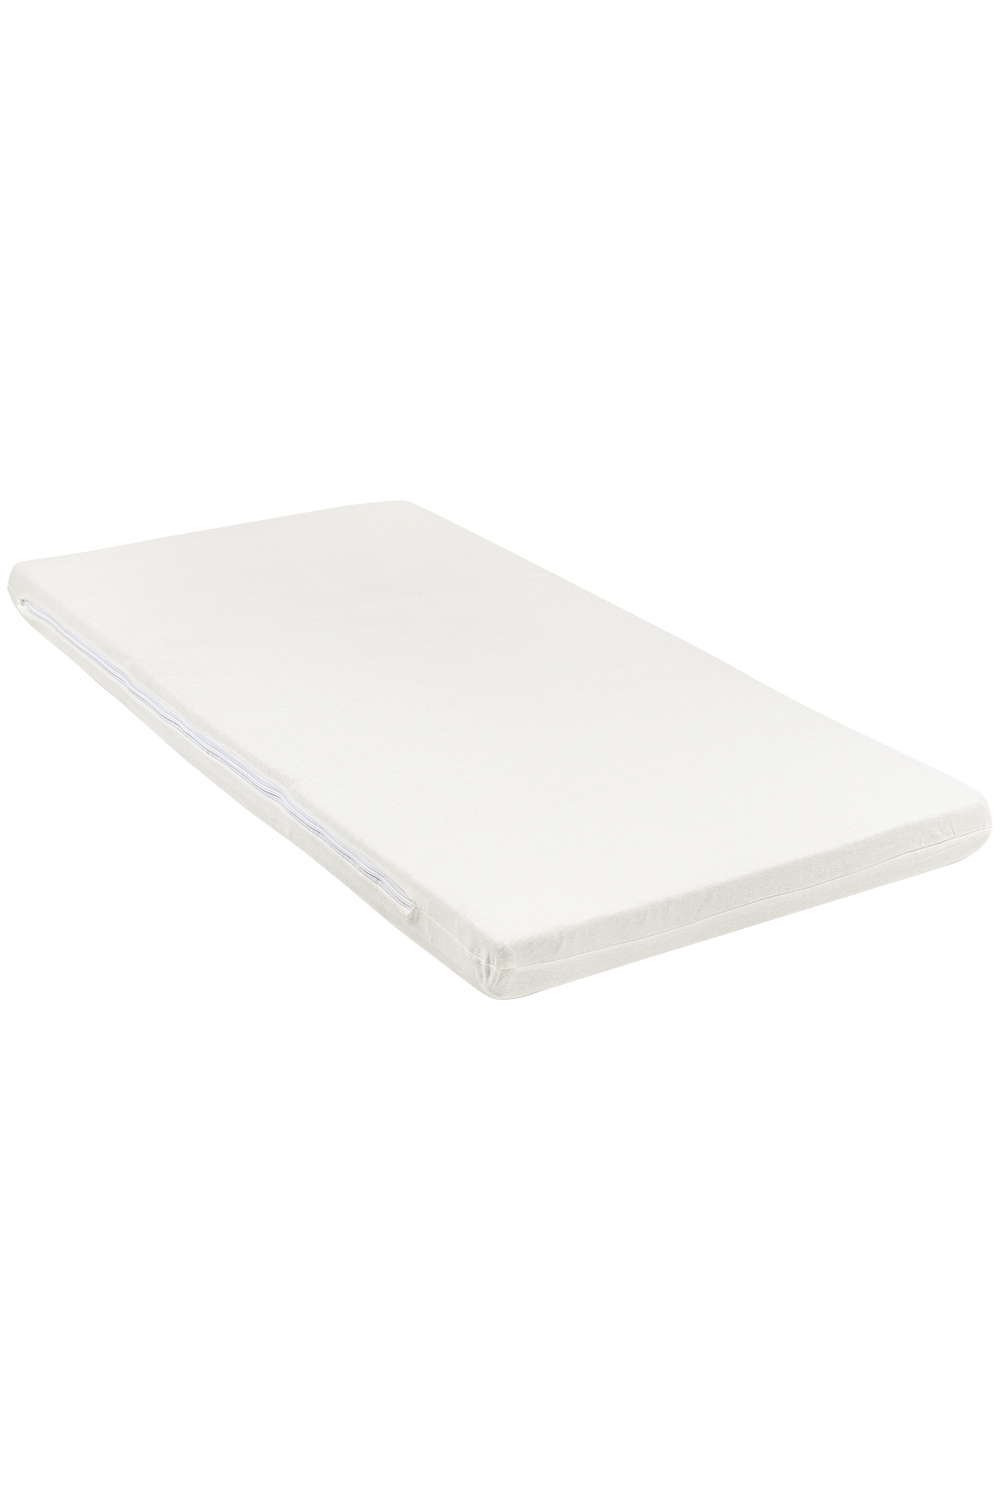 Campingbed matrashoes deluxe Uni - offwhite - 60x120cm